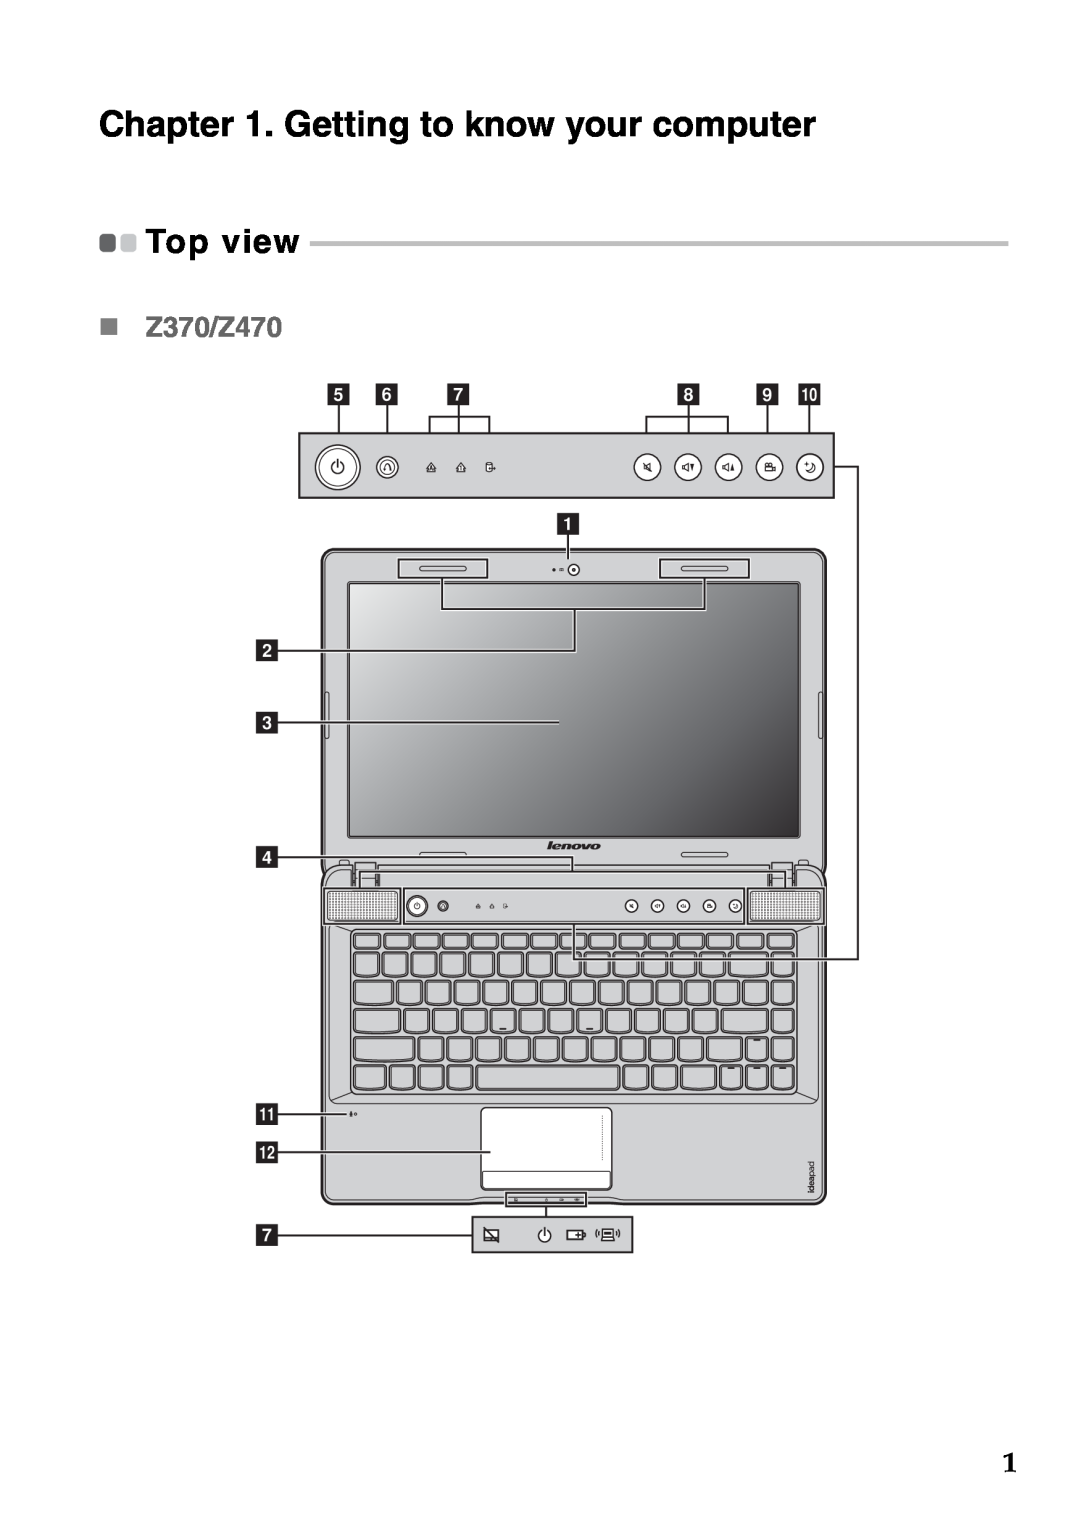 Lenovo Z570 manual Getting to know your computer, Z370/Z470, Top view 